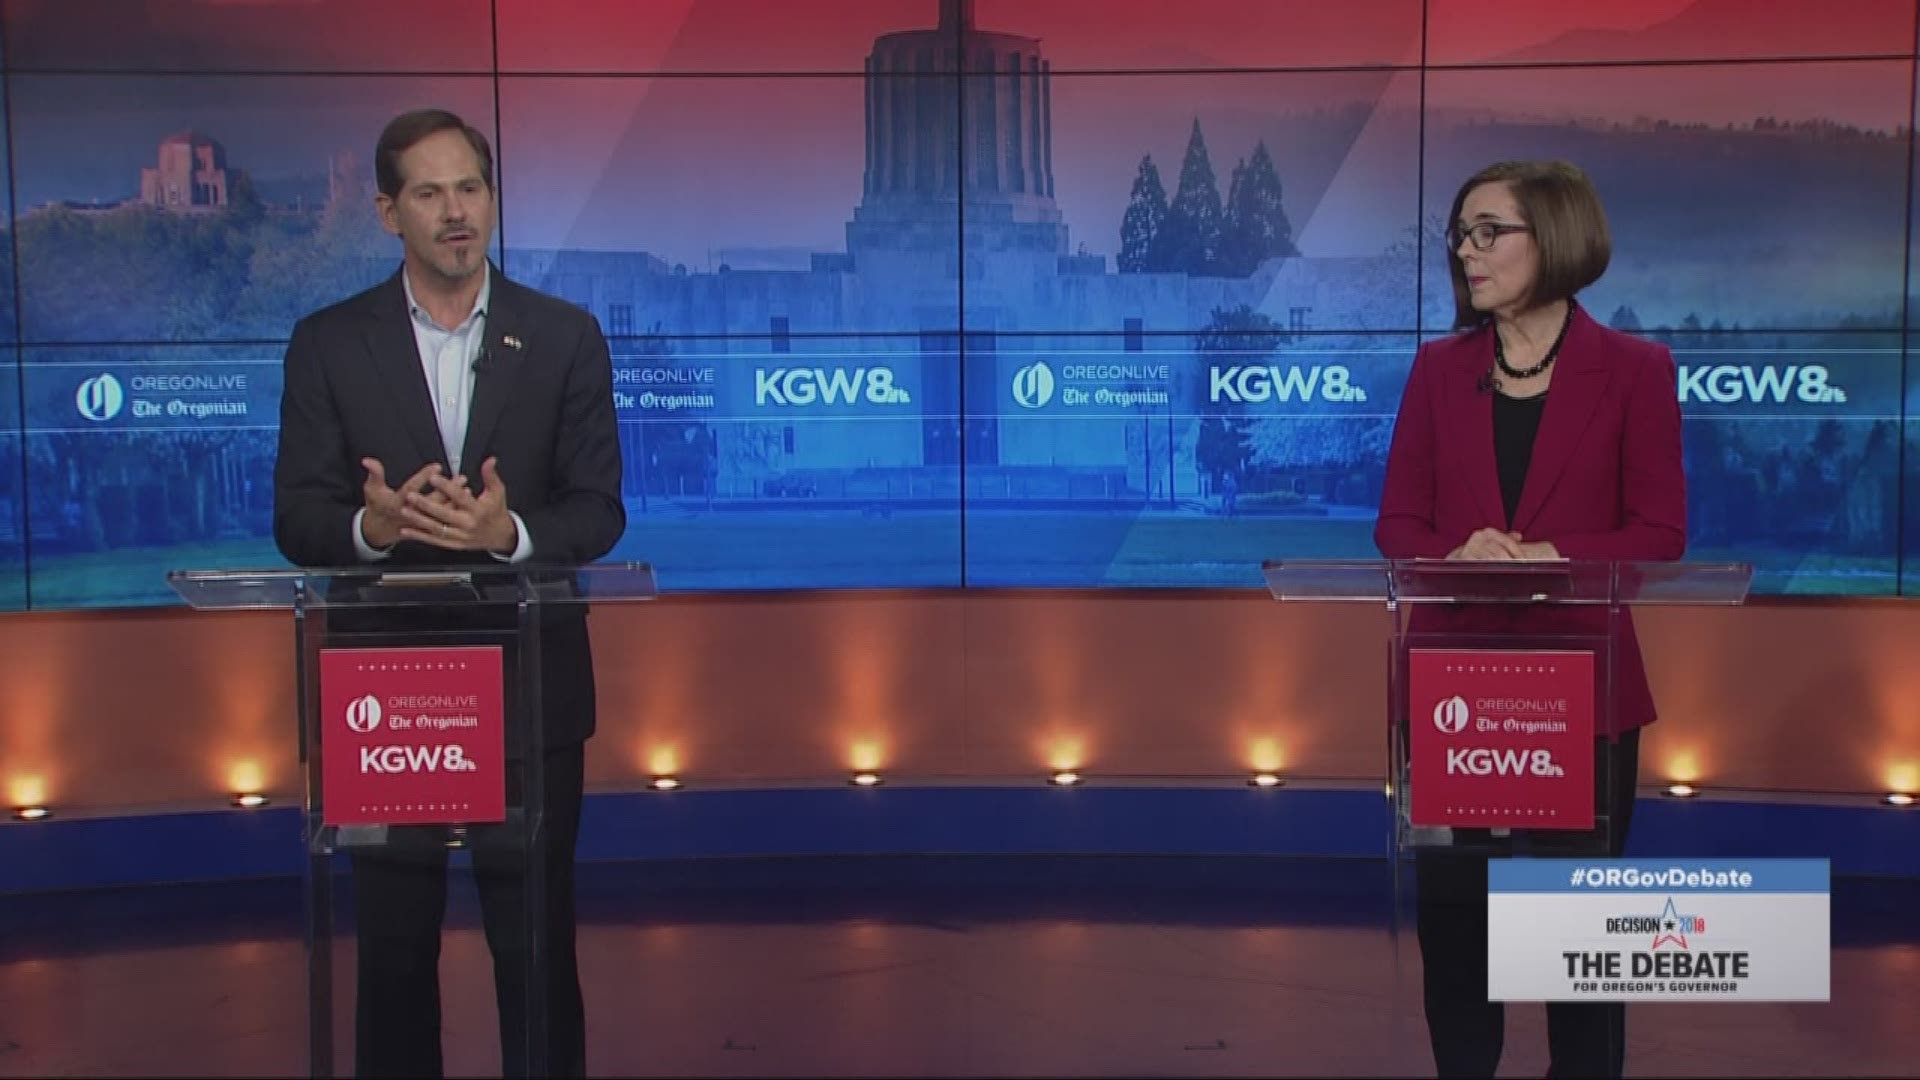 Gov. Brown, Rep. Buehler discuss homelessness and affordable housing in Oregon during a debate on KGW. Debate aired on Oct. 9, 2018.